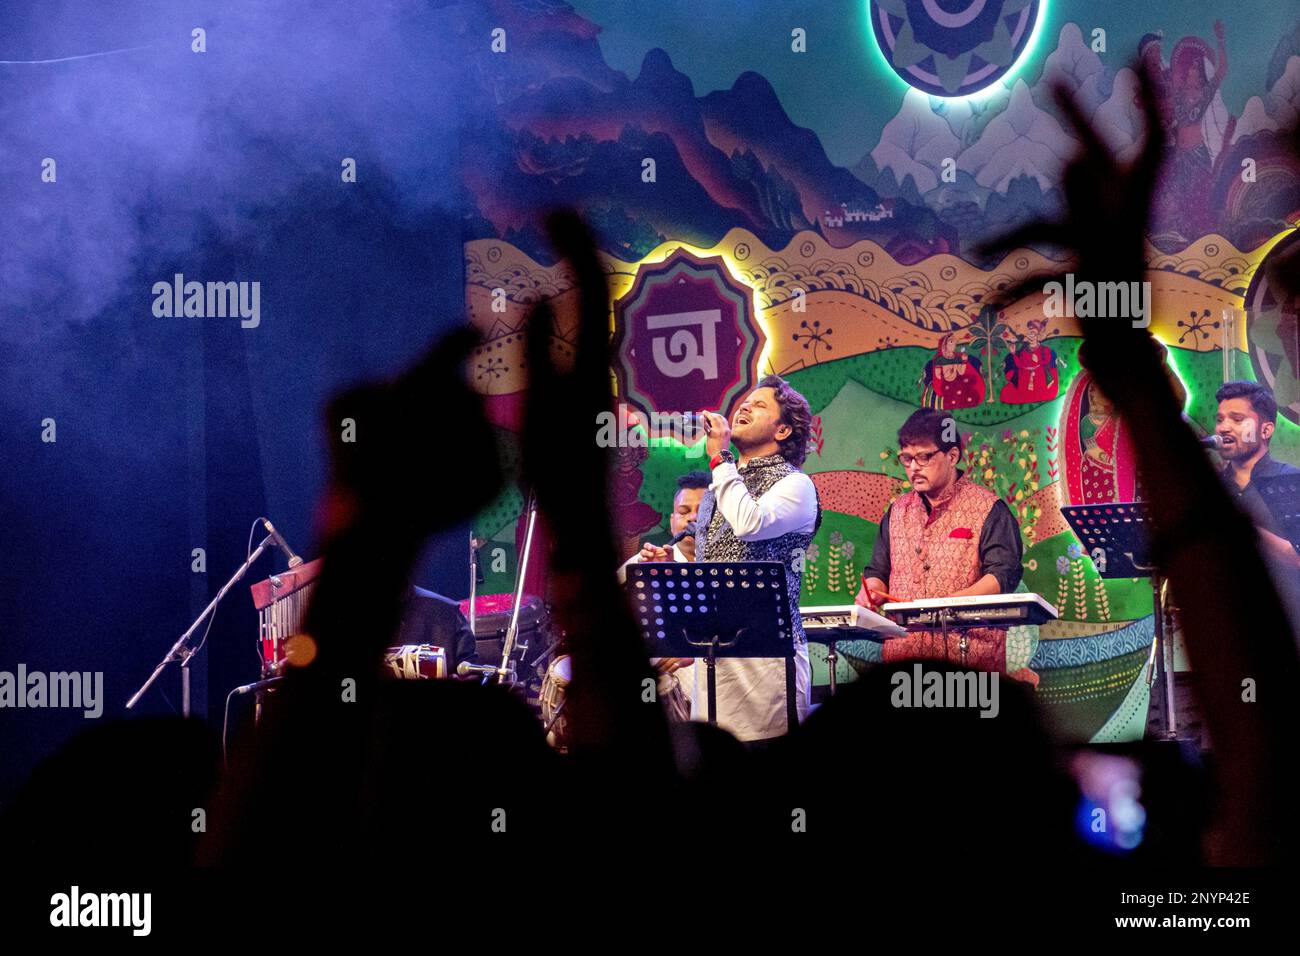 February 25, 2023, New Delhi, Delhi, India: Indian playback singer Javed Ali performing in the capital city Delhi during the Arth â€“ A Culture Fest, is one of Indiaâ€™s biggest cultural festivals. It is a celebration of India and her roots and an attempt to rediscover the brilliance of Indian literature, culture, heritage, society, music, art, and history..From Kun Faya Kun to Arziyaan, Javed Ali brings his powerful and soulful voice and appealing renditions..Javed Ali is an Indian playback singer who predominantly sings in Hindi. He has also sung in various Indian languages including Bengali Stock Photo